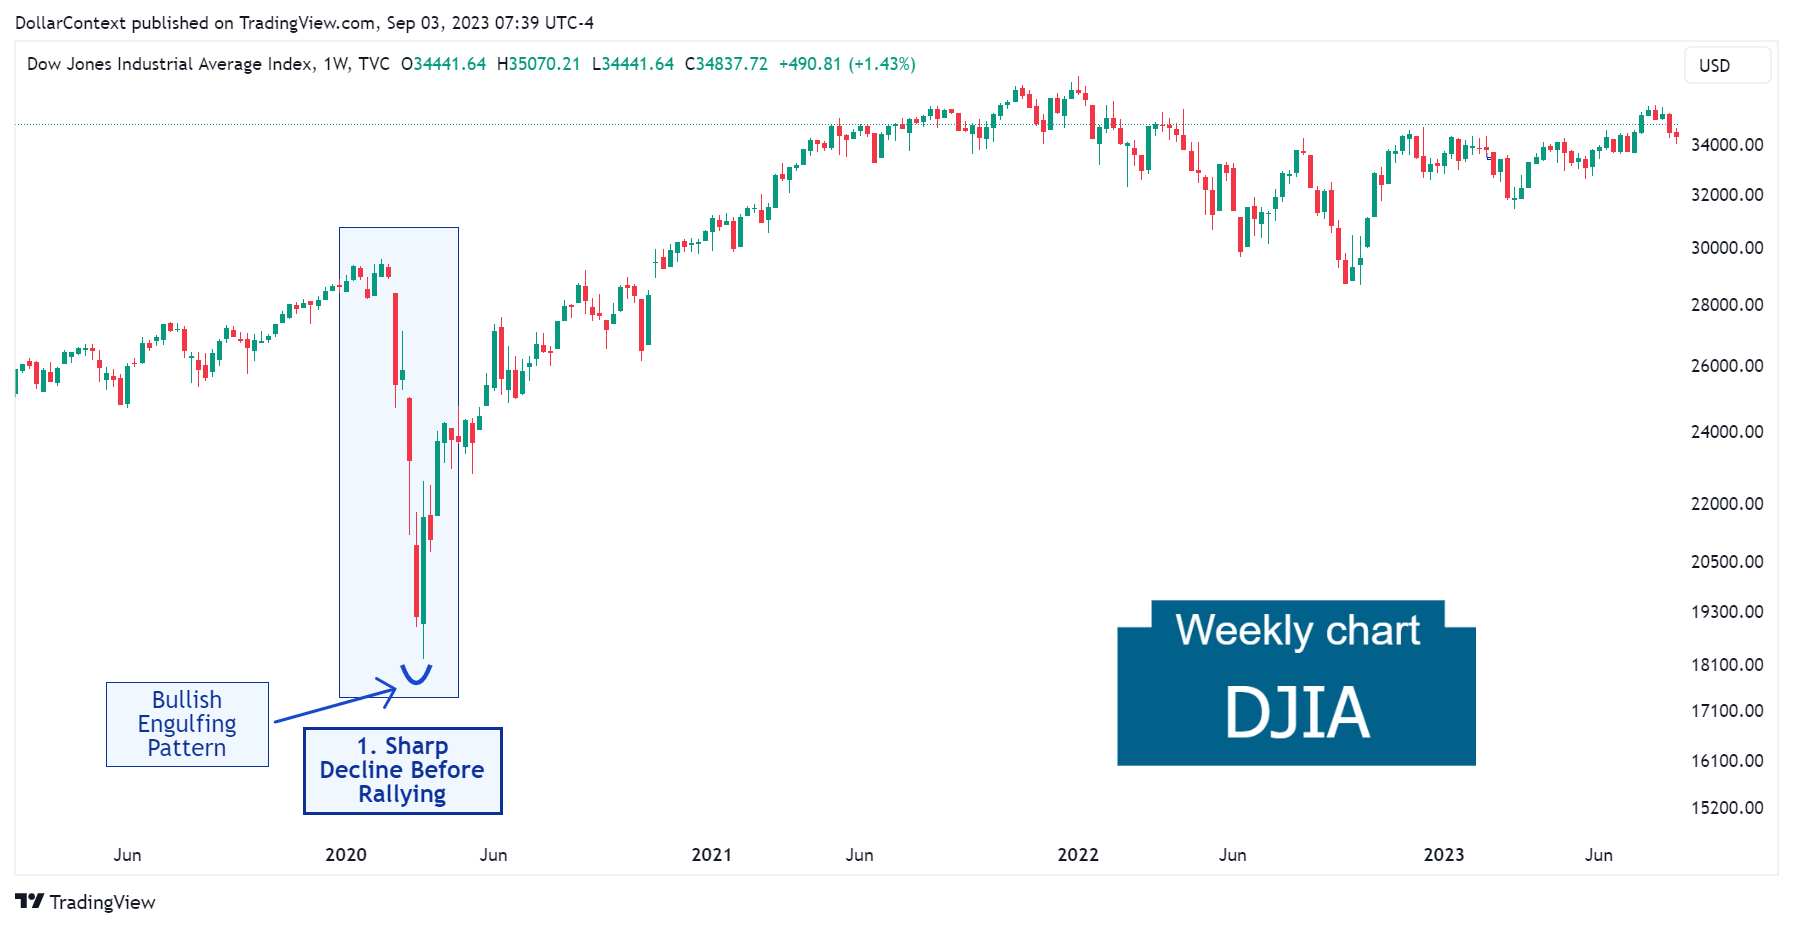 Dow Jones Industrial Average: The Extreme Volatility in Early 2020 (Weekly Chart)